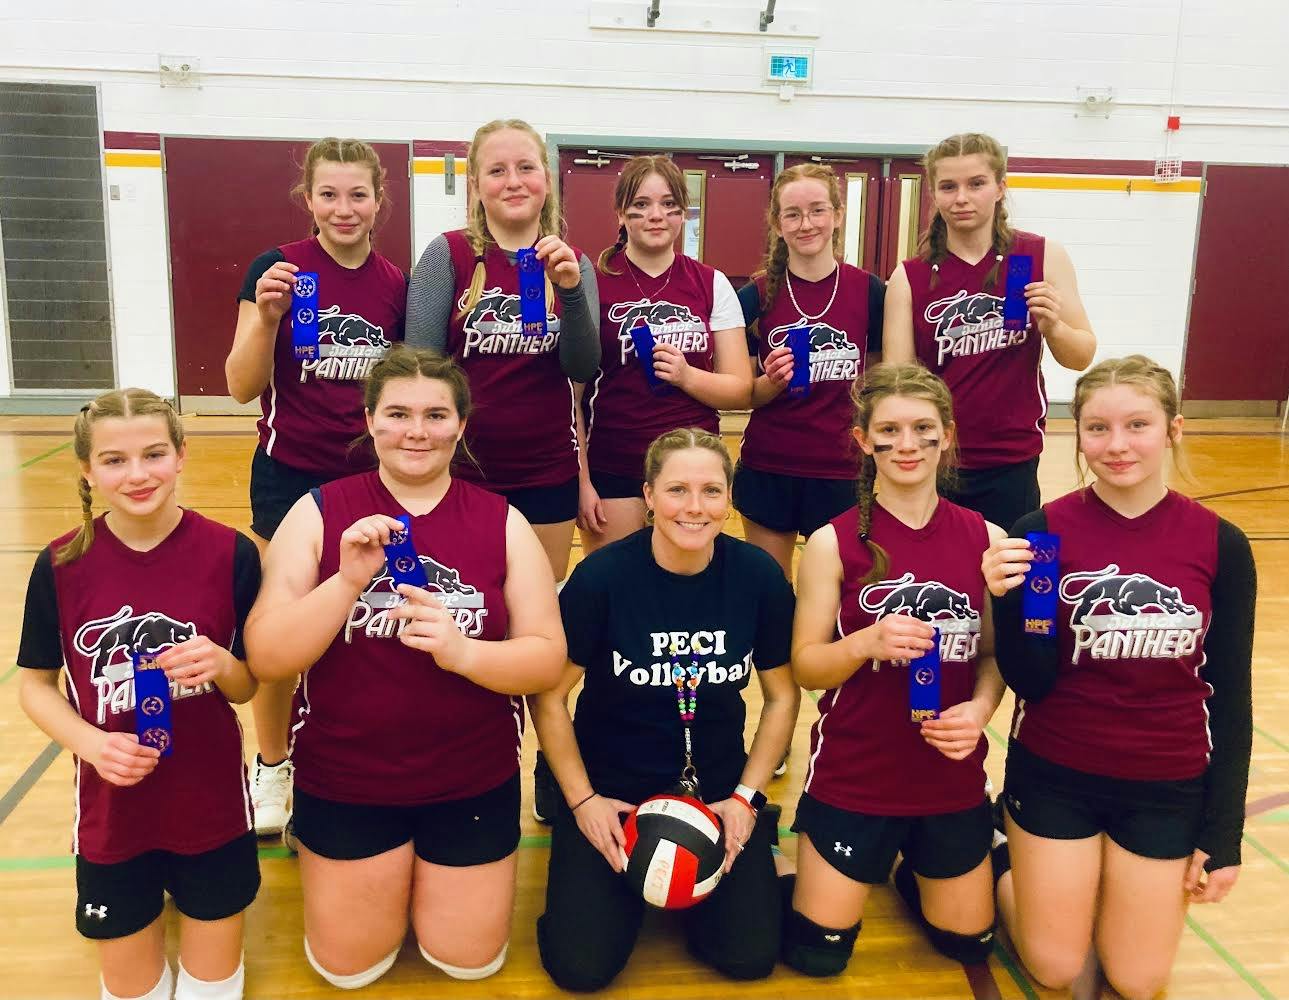 <p>The PECI Panthers elementary girls volleyball team came home with silver medal finish at the 2023 HPEDSB championships in Bancroft earlier this month. Team members include: (Back row from left) Kensey Koutroulides, Maeve Burkitt, Annabelle Brough, Chanell Ennis, Averie Cole (Front)  Rowan Holmes, Callie Craig, coach Heather Egan , Blythe Everhardus, and Lilee Daynard.<br />
(Submitted Photo)</p>
